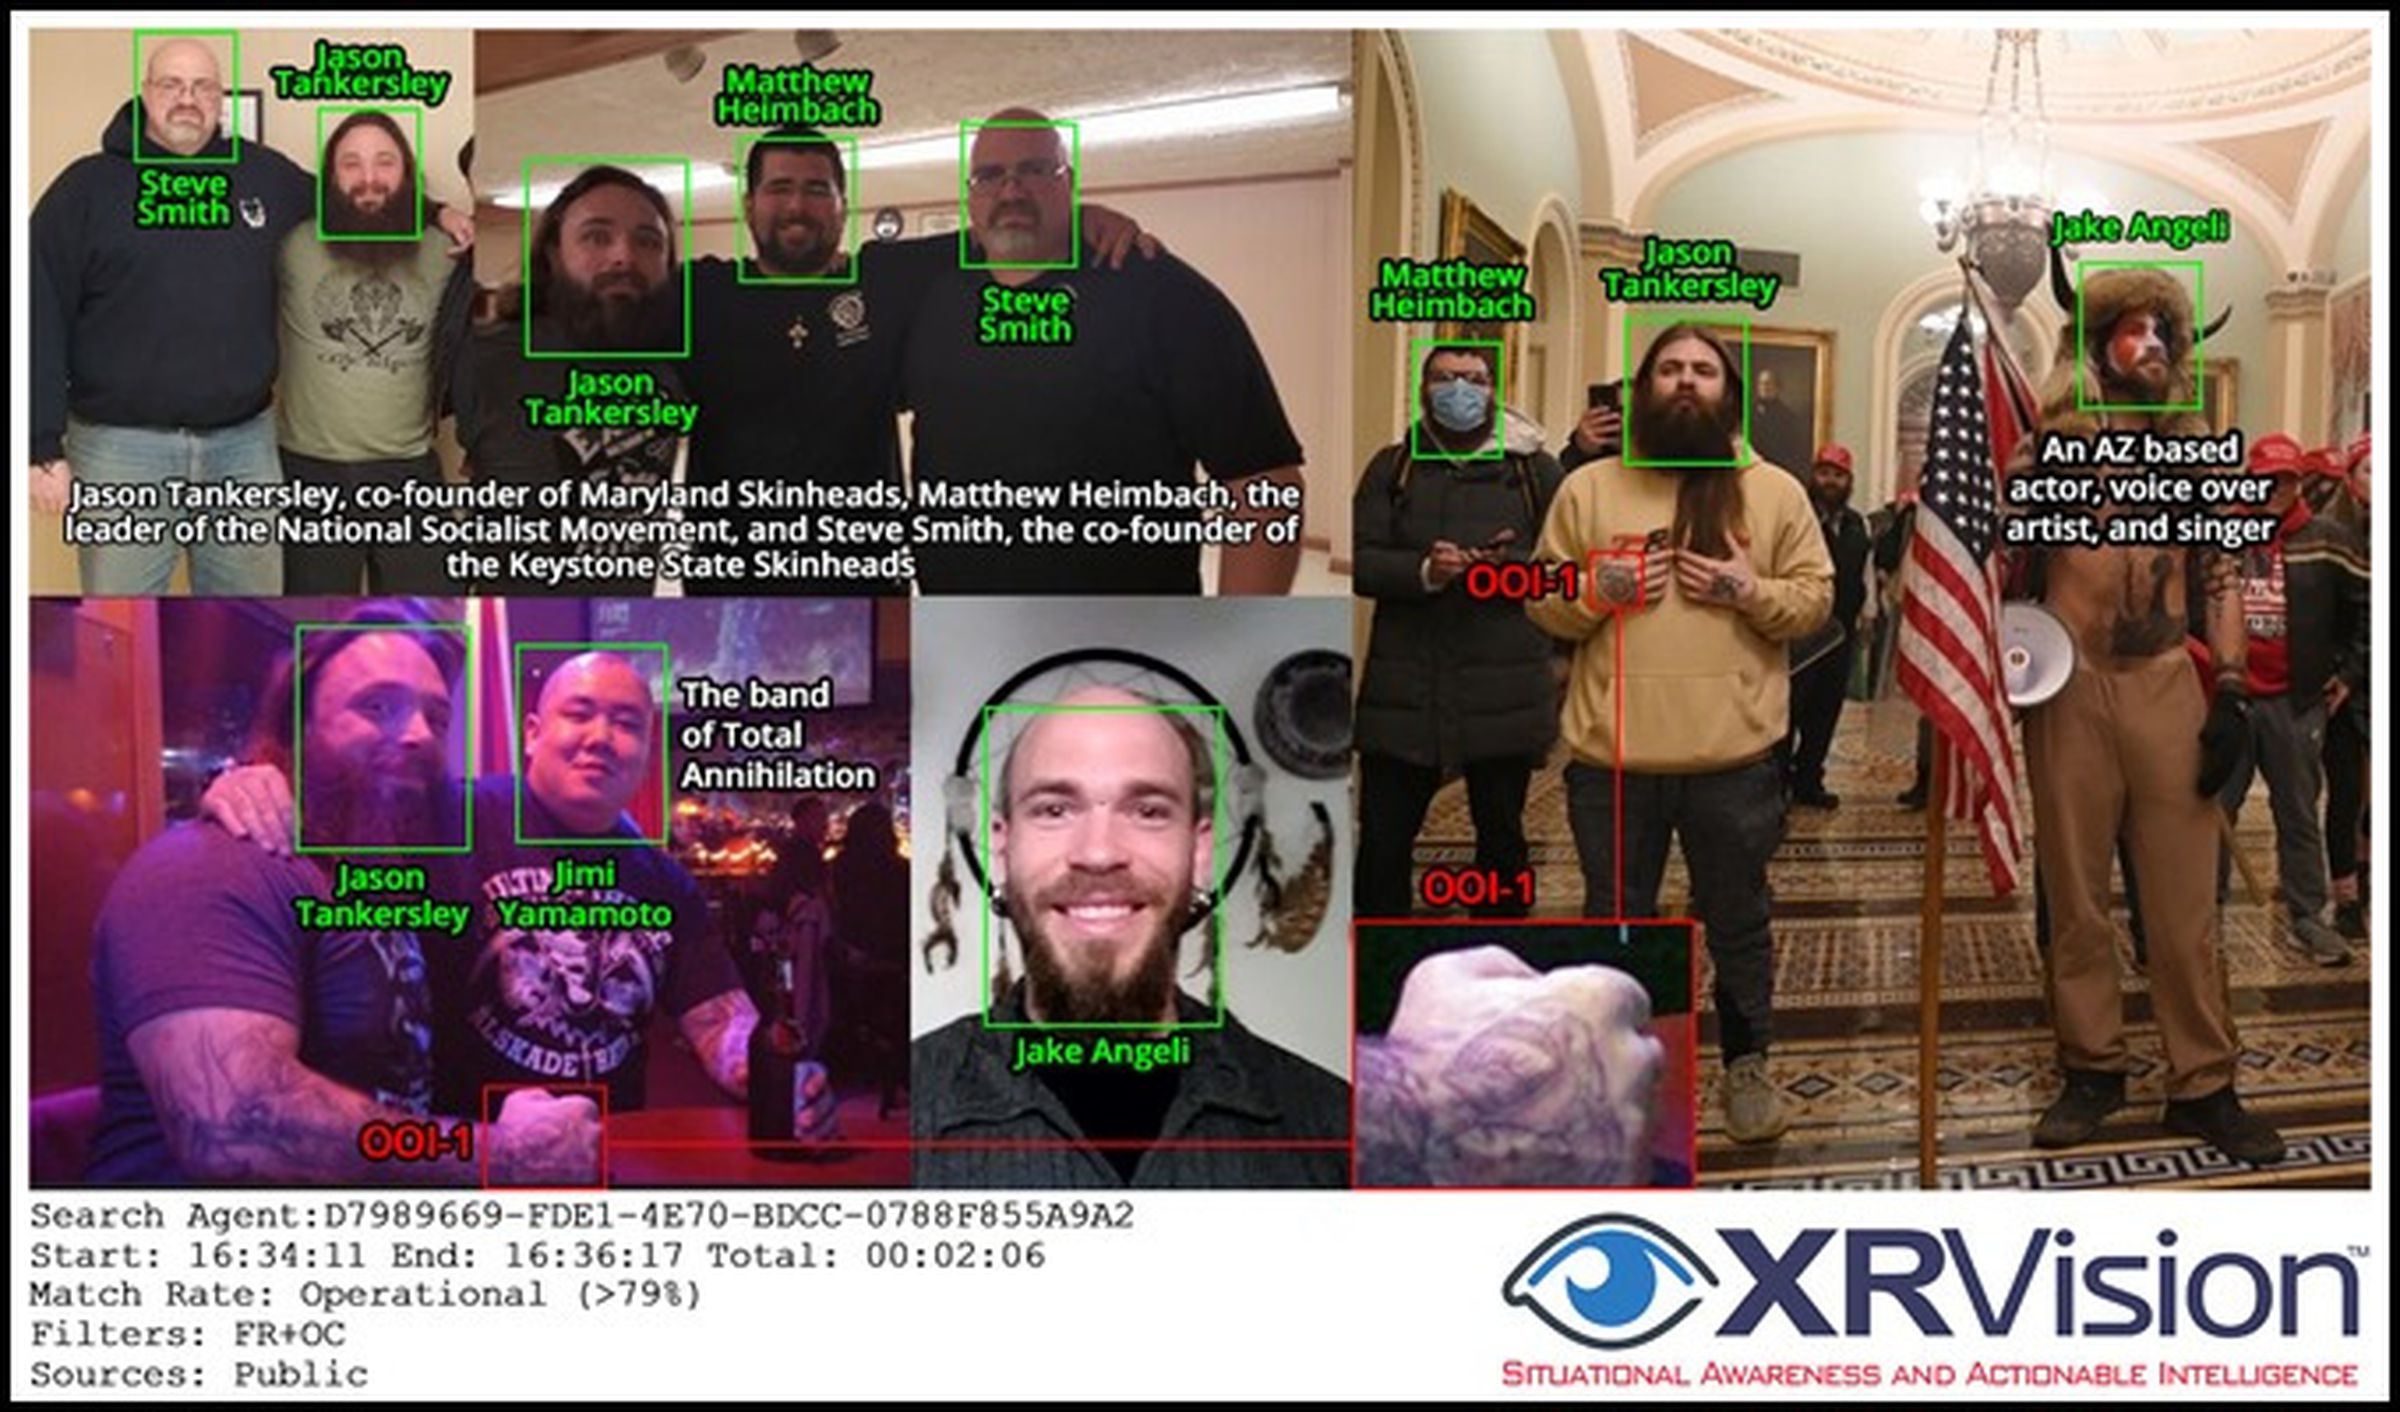 XRVision image purportedly analyzing photograph from the riots on Capitol Hill.